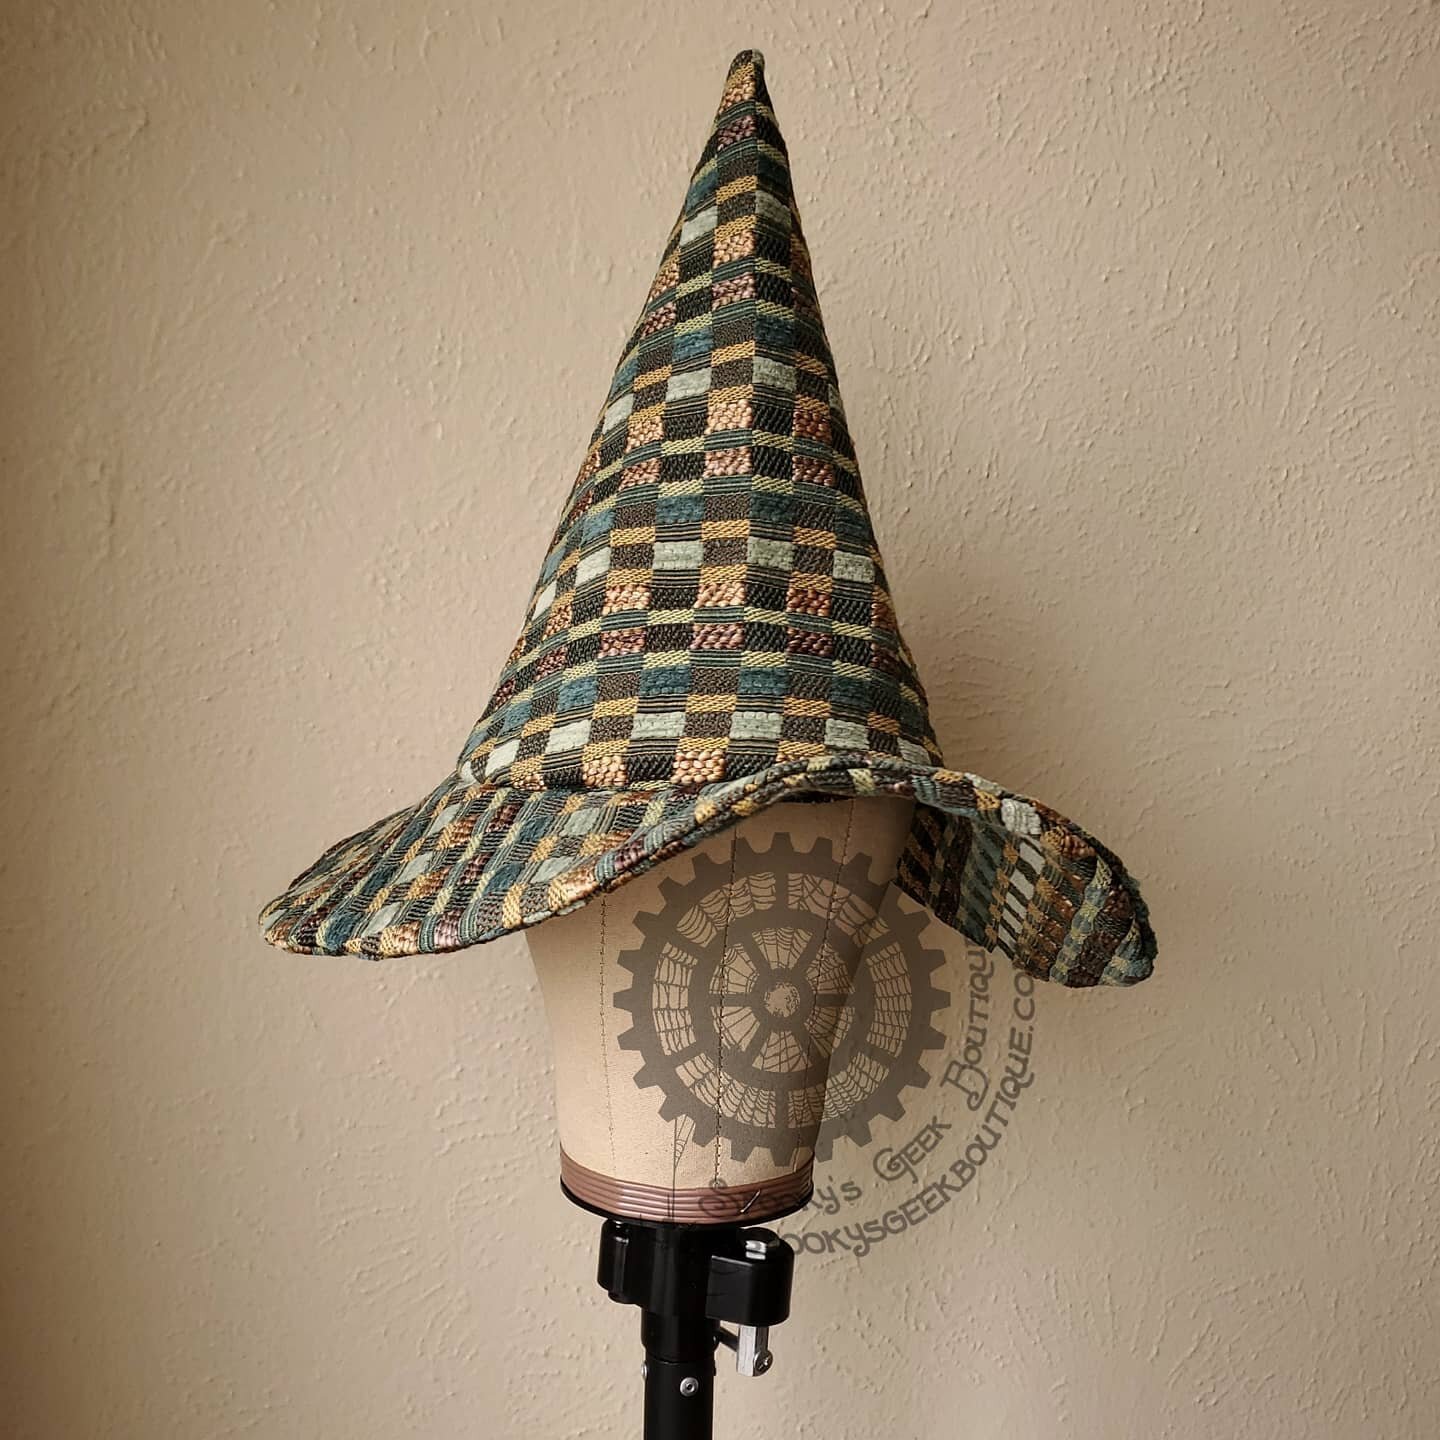 Been wanting to pick up a fancy new witch hat? Now is a great time!! We have so many cute ones in stock! Some even on clearance! Grab them for 30% off at checkout! 🌿 #CottageCore #WitchFashion #WitchAesthetic #WitchHat #MoriFashion #WitchyThings #Po